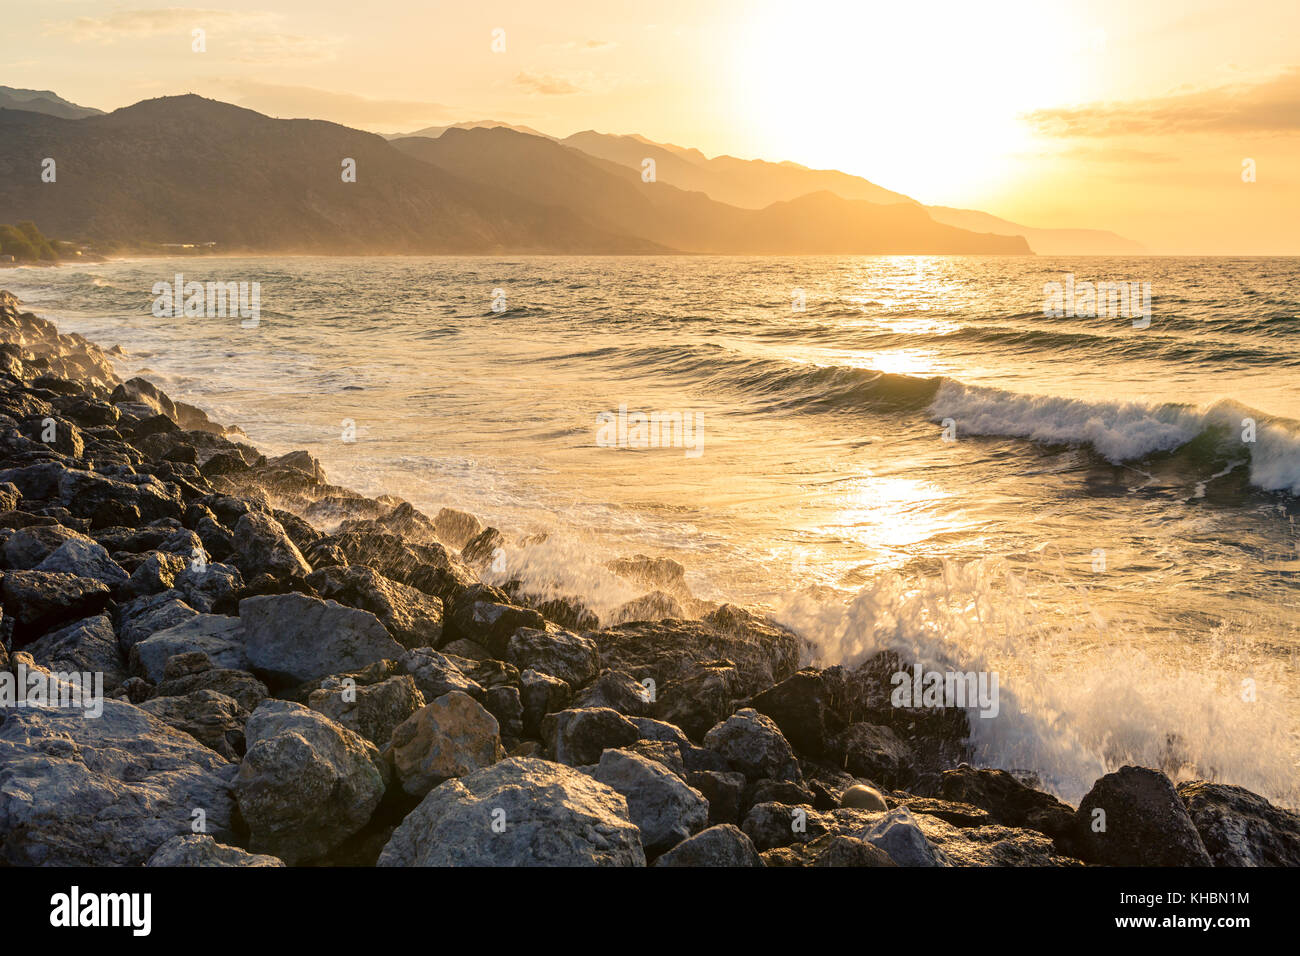 Inspirational beautiful mountains landscape with sea, coast, beach and rocks, high mountains in background at sunrise on Crete Island, Greece. Stock Photo